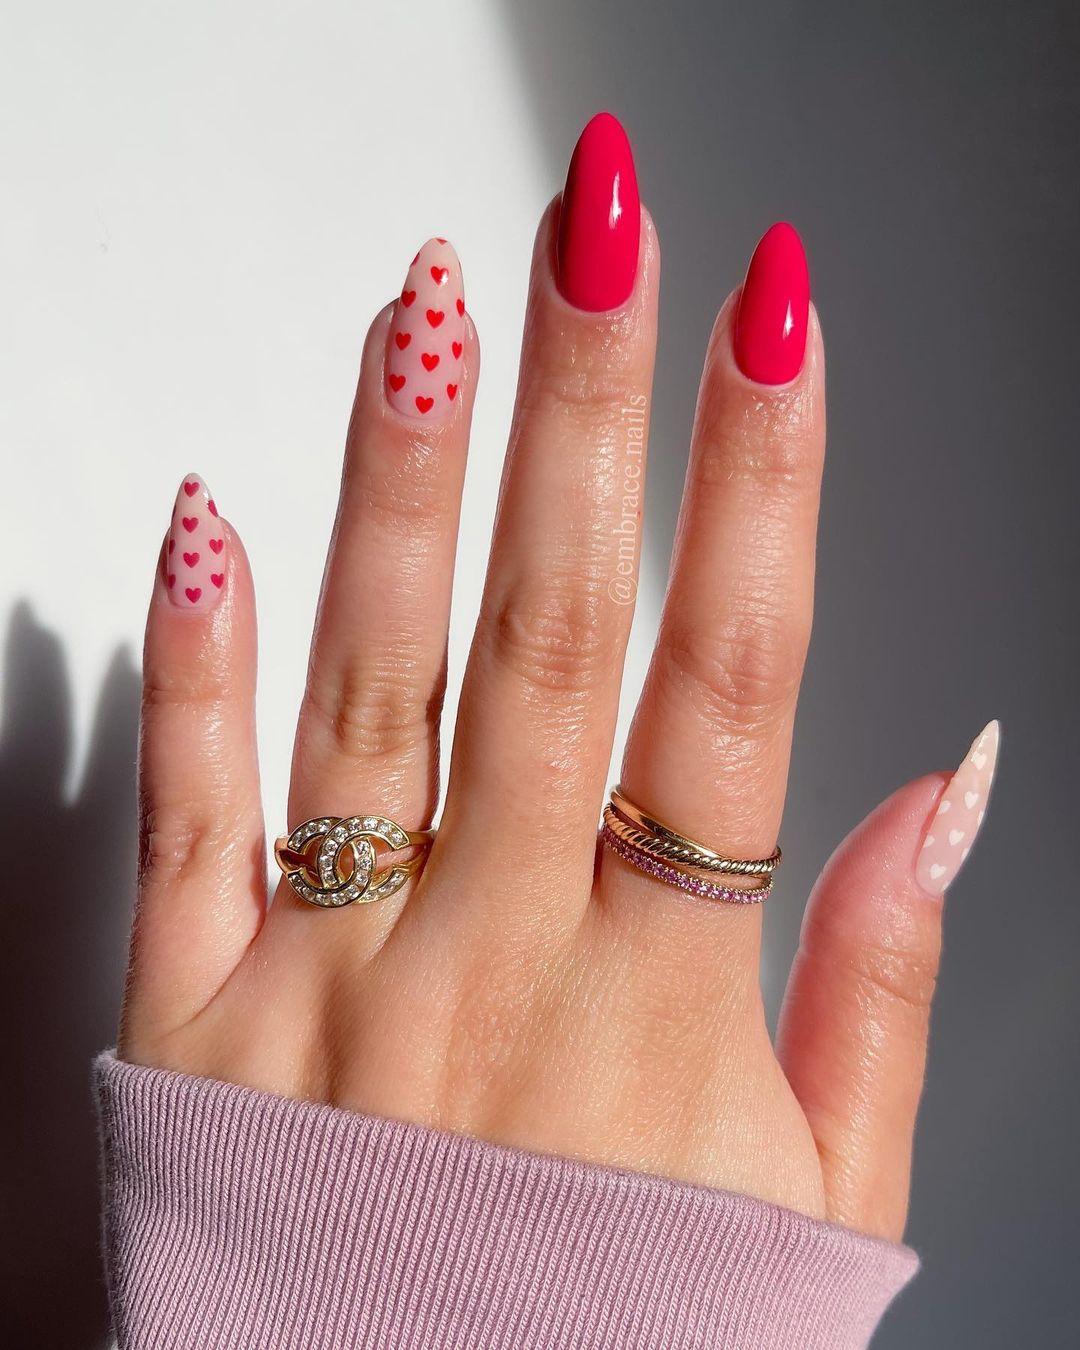 Red and pink Valentine Nail Designs with polka dots